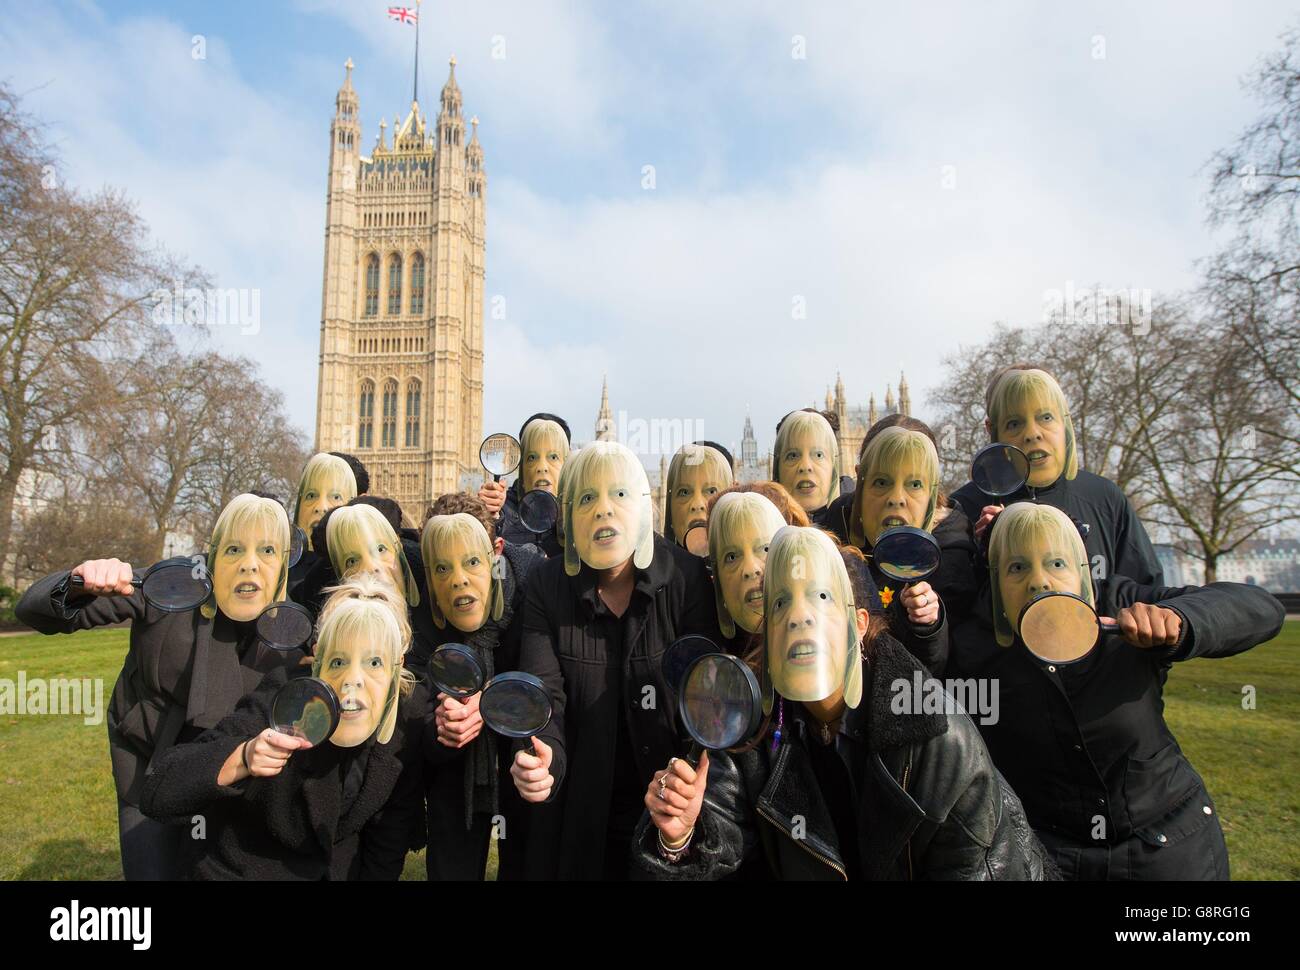 Members of the campaign group NoteMyVote.co.uk wearing masks of Home Secretary Theresa May at a photocall outside the Houses of Parliament, in Westminster, London, to protest against the speed with which the Investigatory Powers Bill is being pushed through the House of Commons. Stock Photo